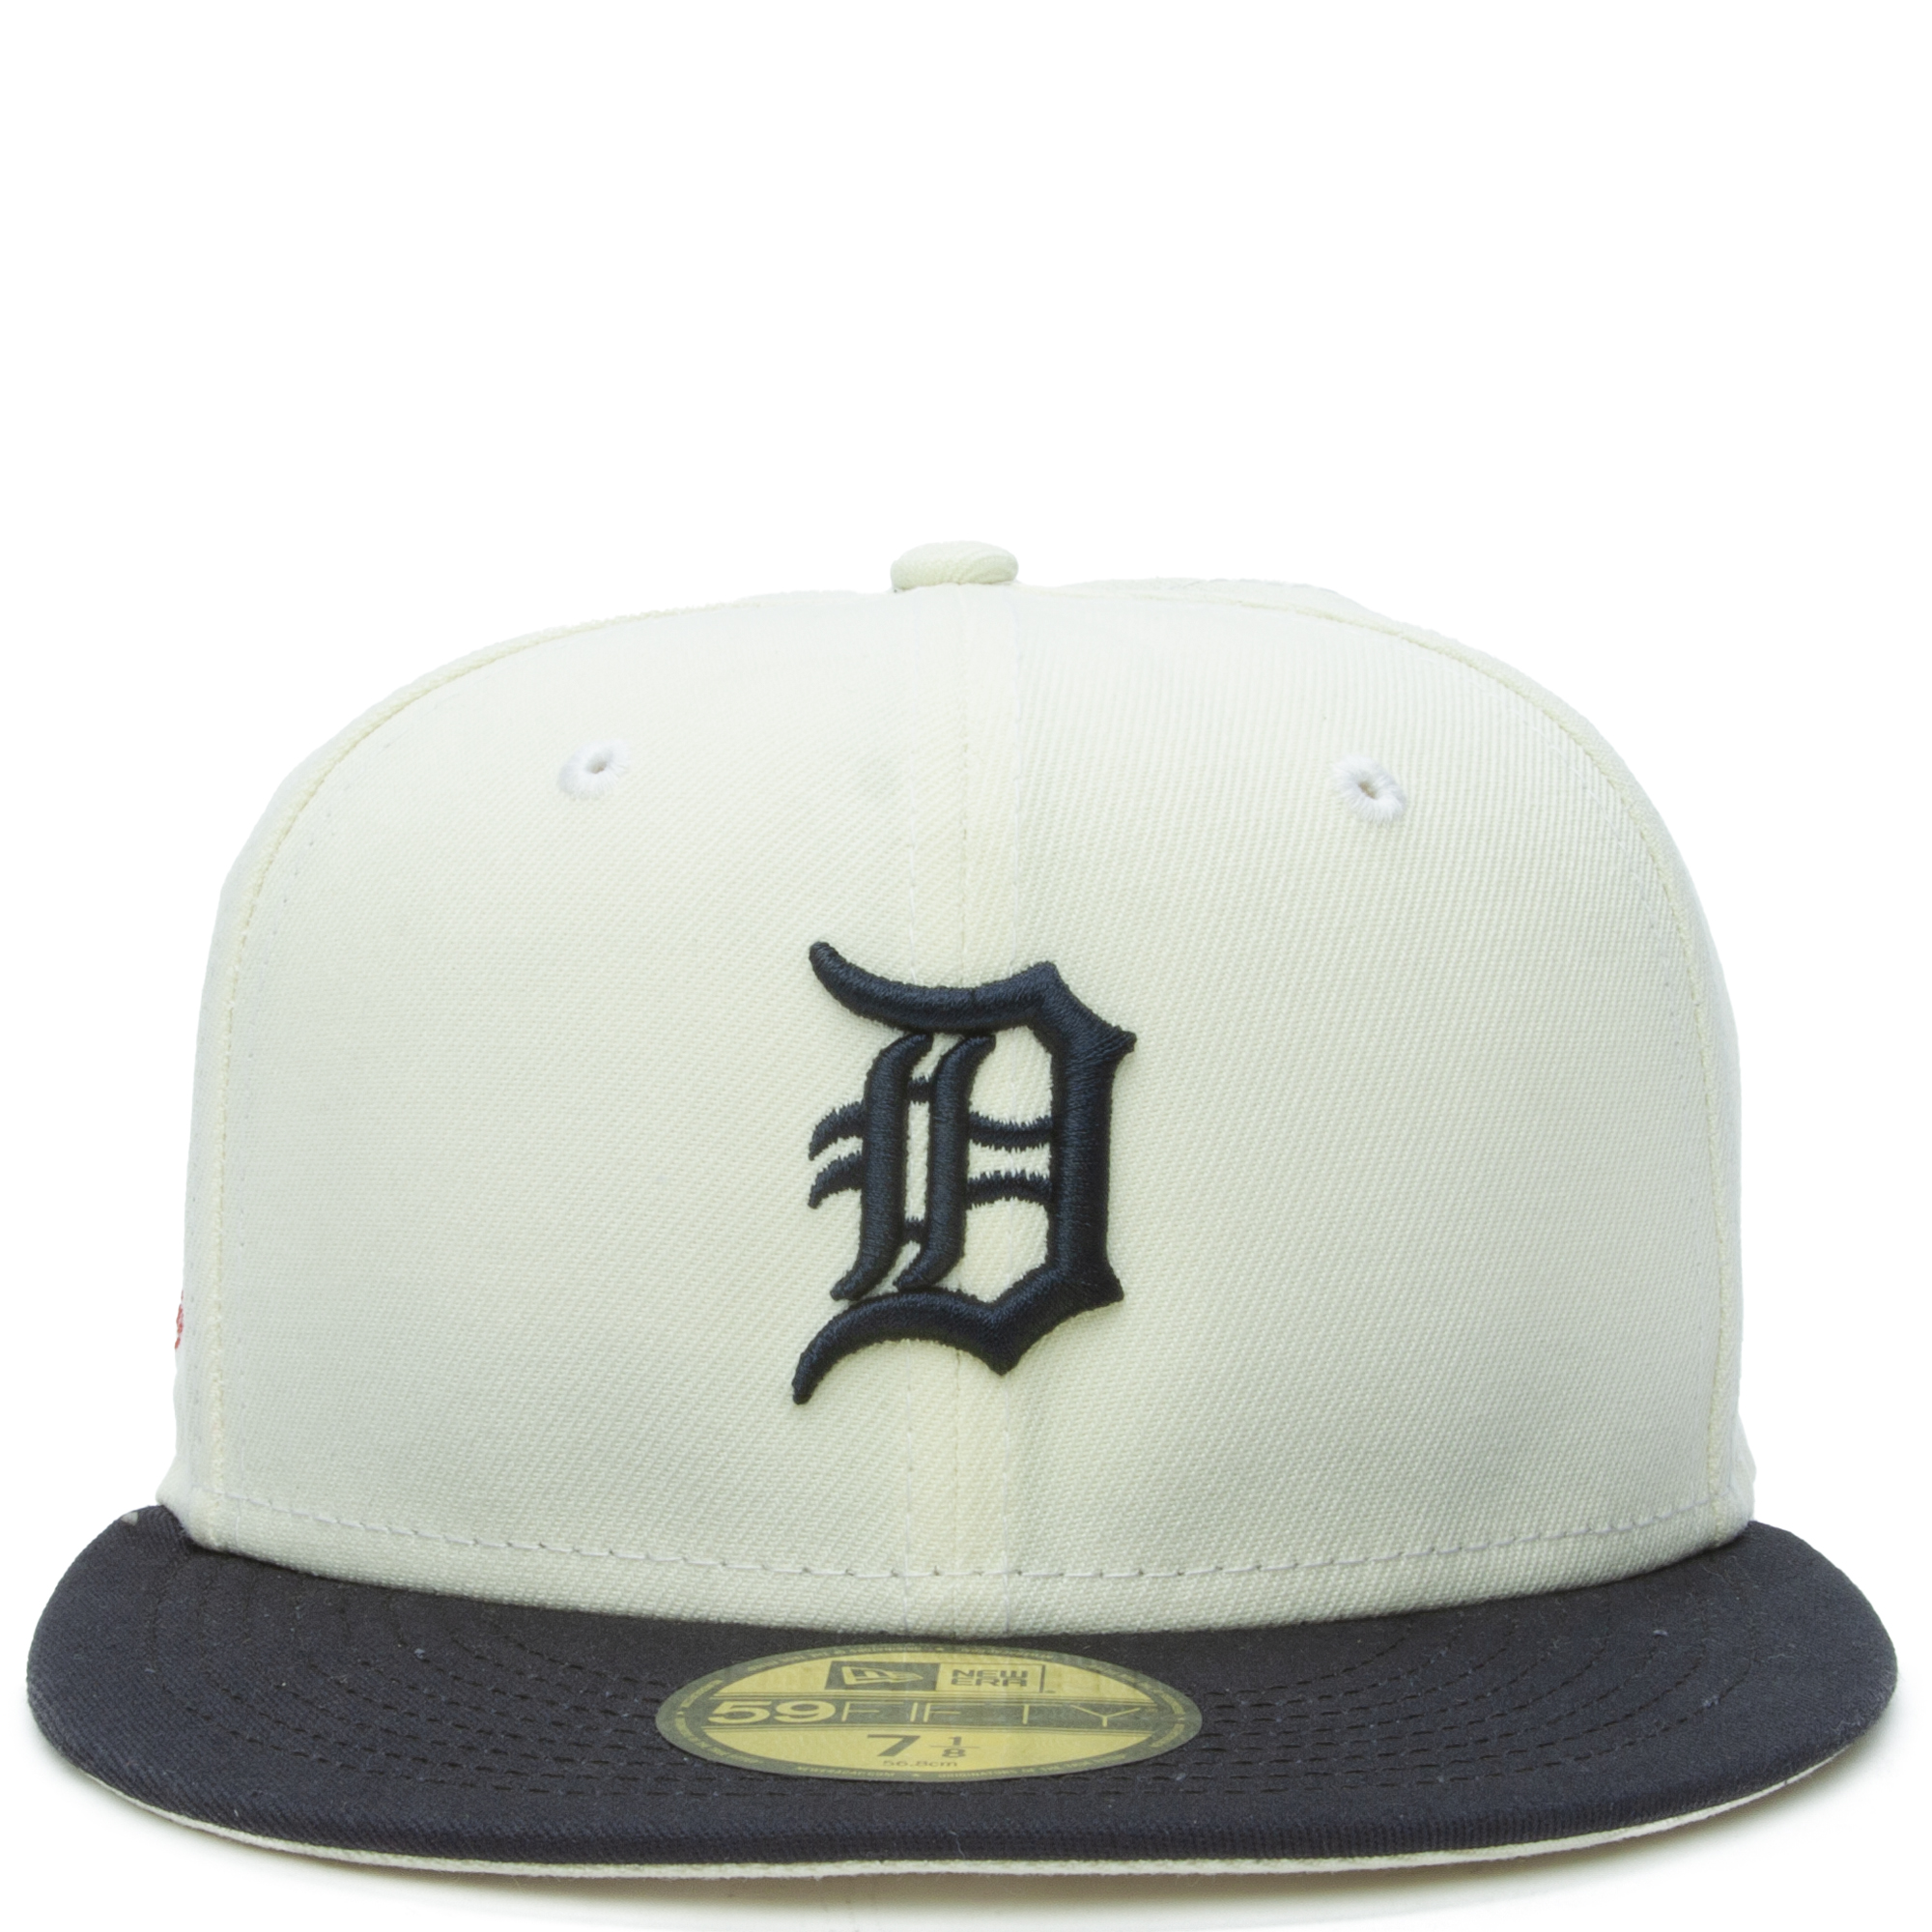 Shelta - New Era Detroit Tigers 59Fifty Fitted Cap Navy (12572844)